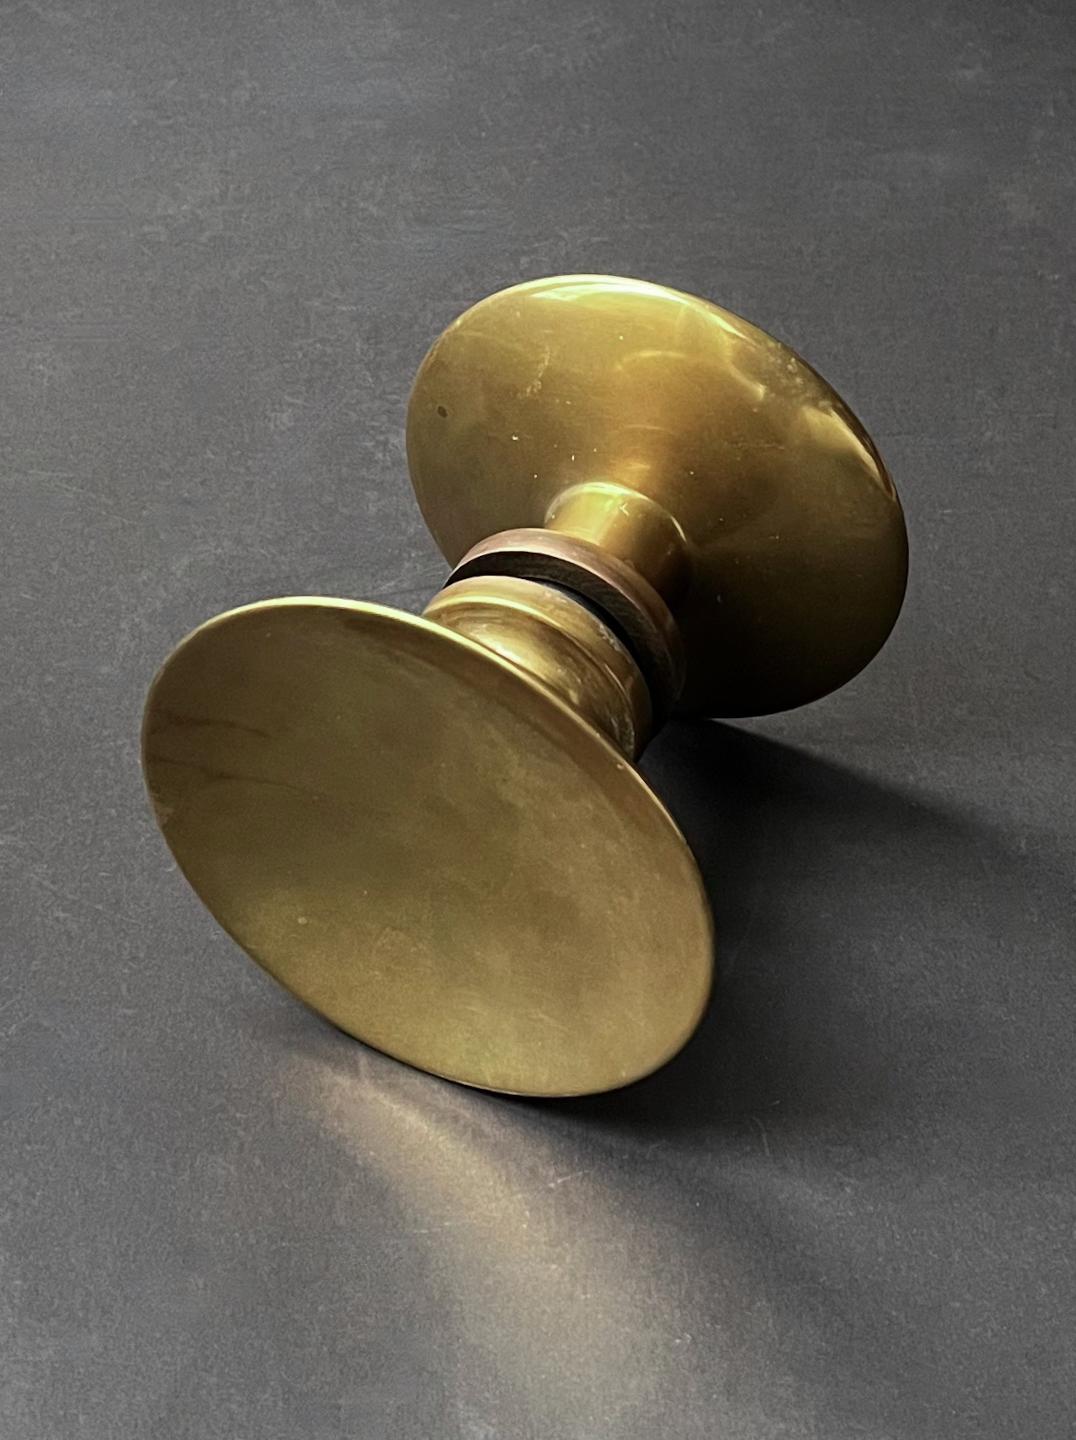 Circular push-and-pull door handle in bronze, mid-20th century, France.

A simple elegant handle, made up of two separate round pieces; each side with a slightly concave dish and wide stem. The components are in good vintage condition with signs of